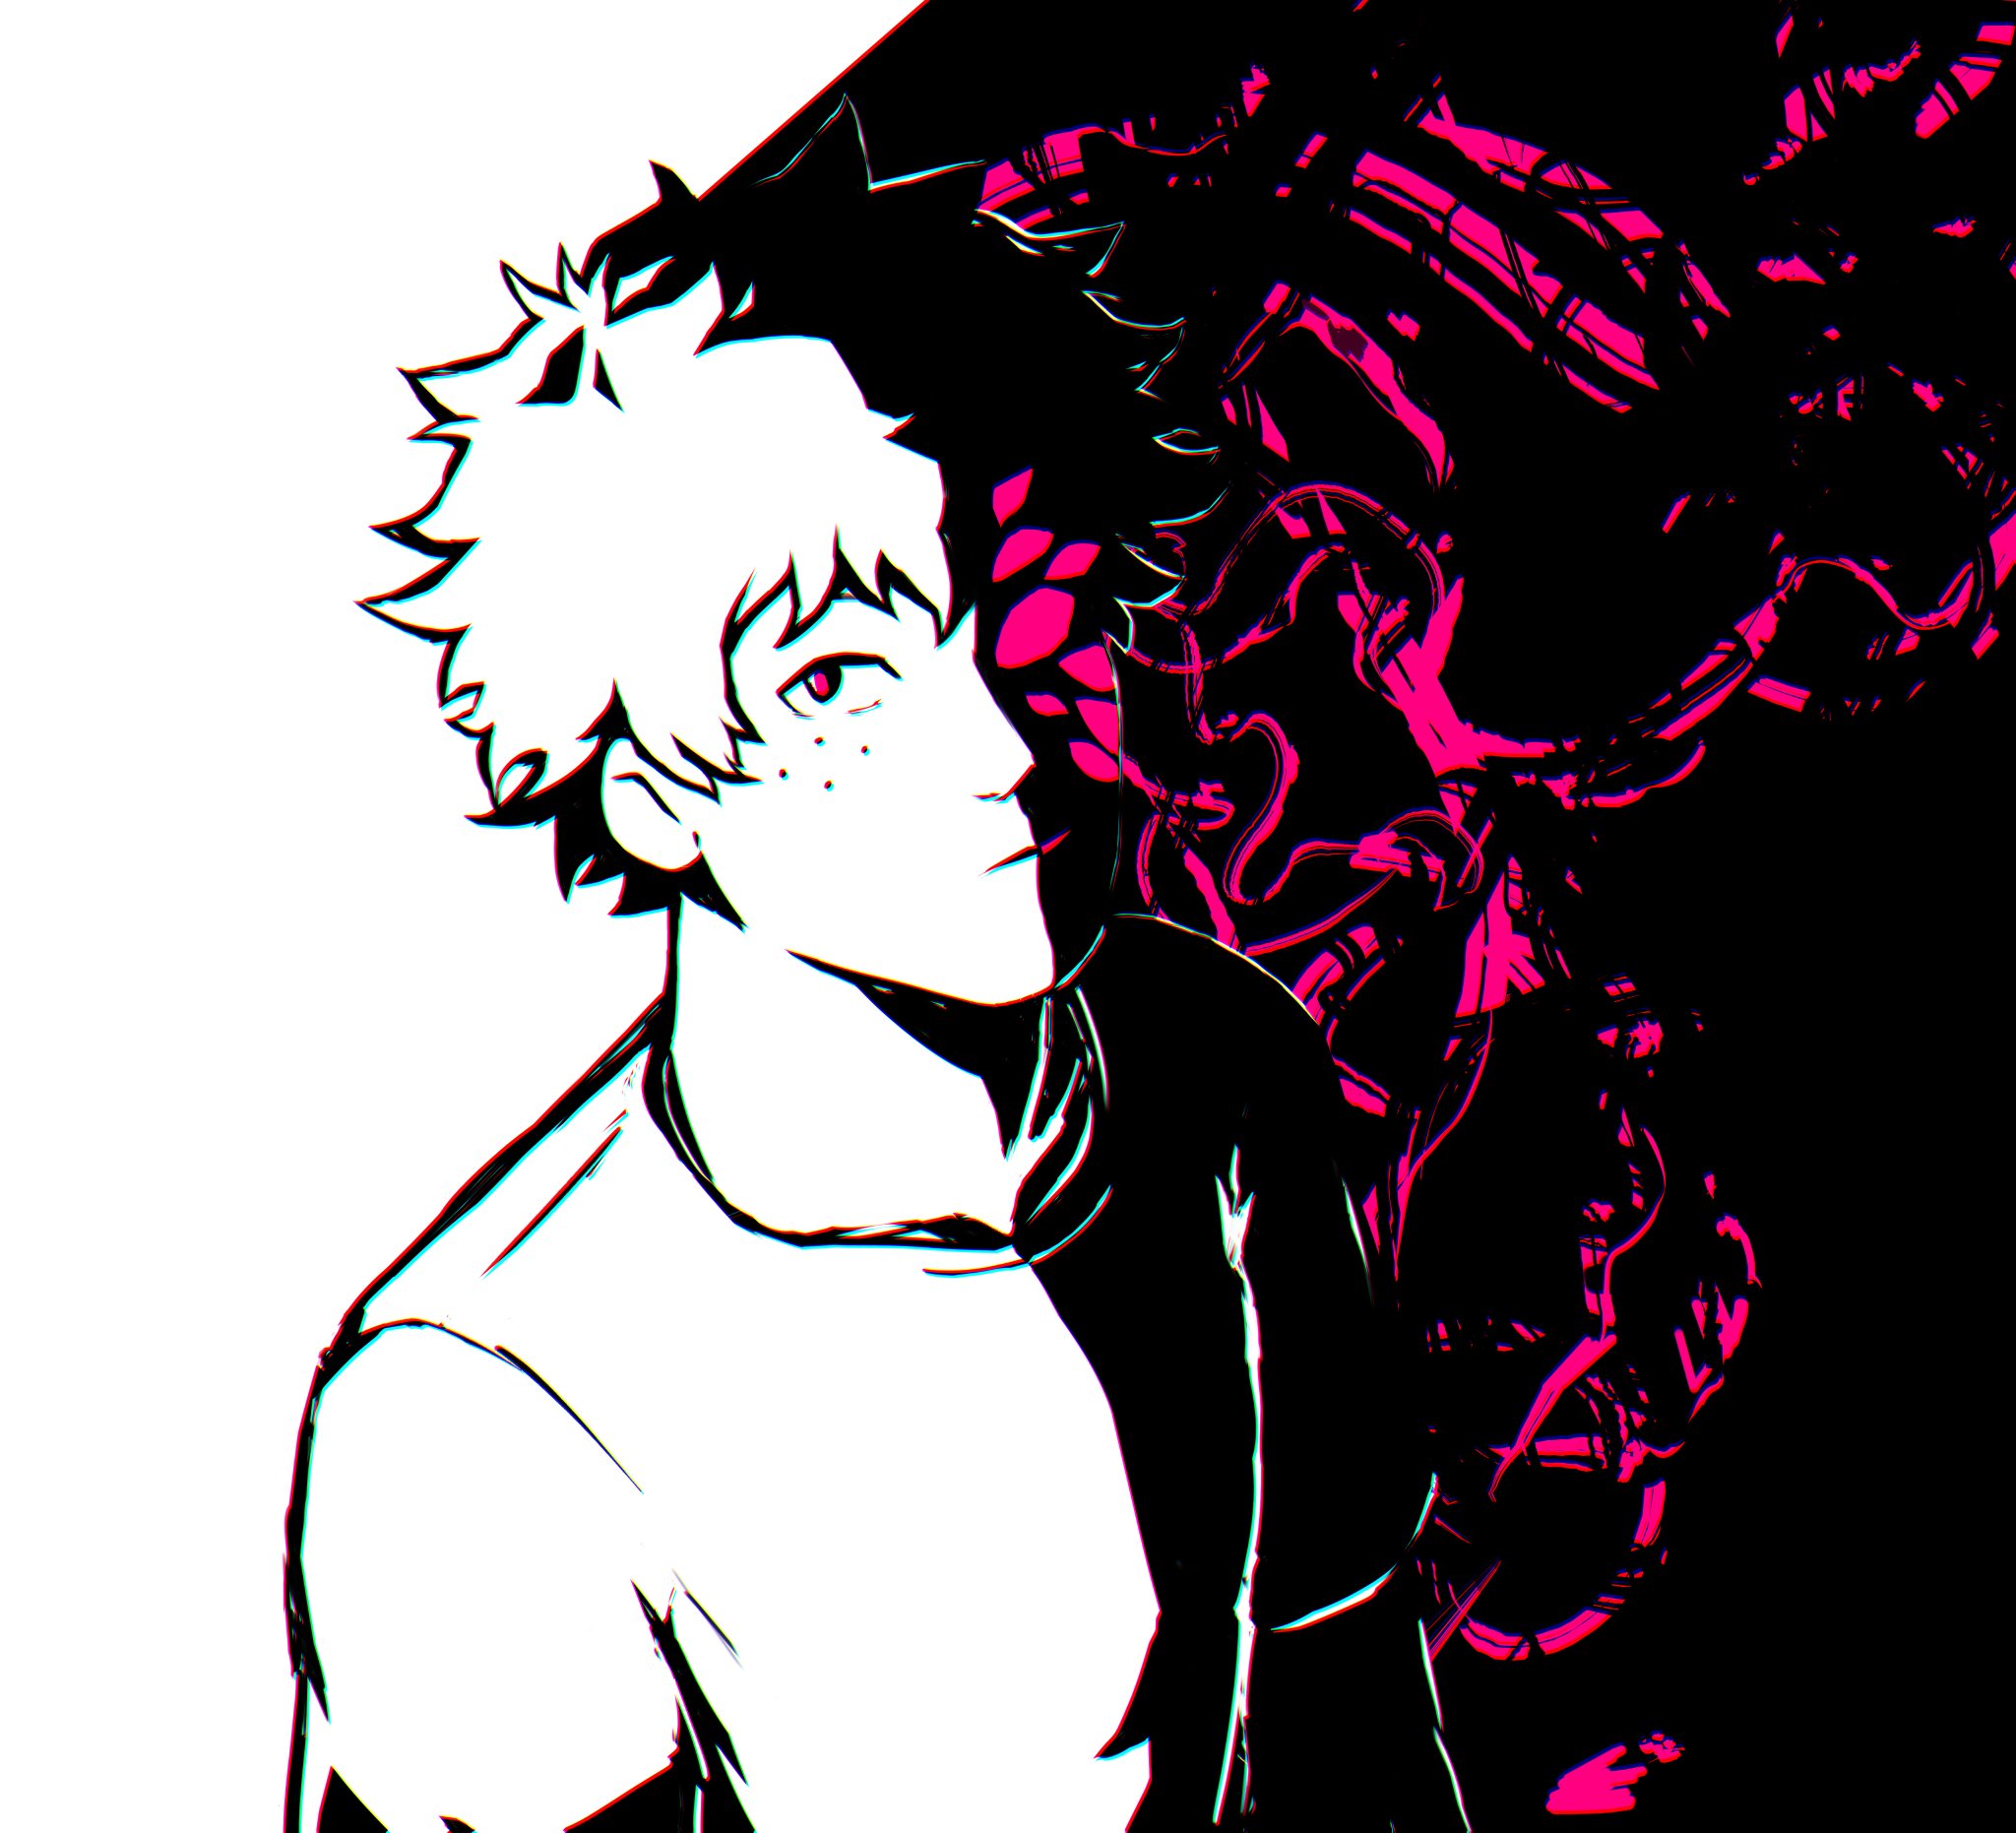 “#deku day 6/366: listened to SIAMÉS "The Wolf" a lot ear...